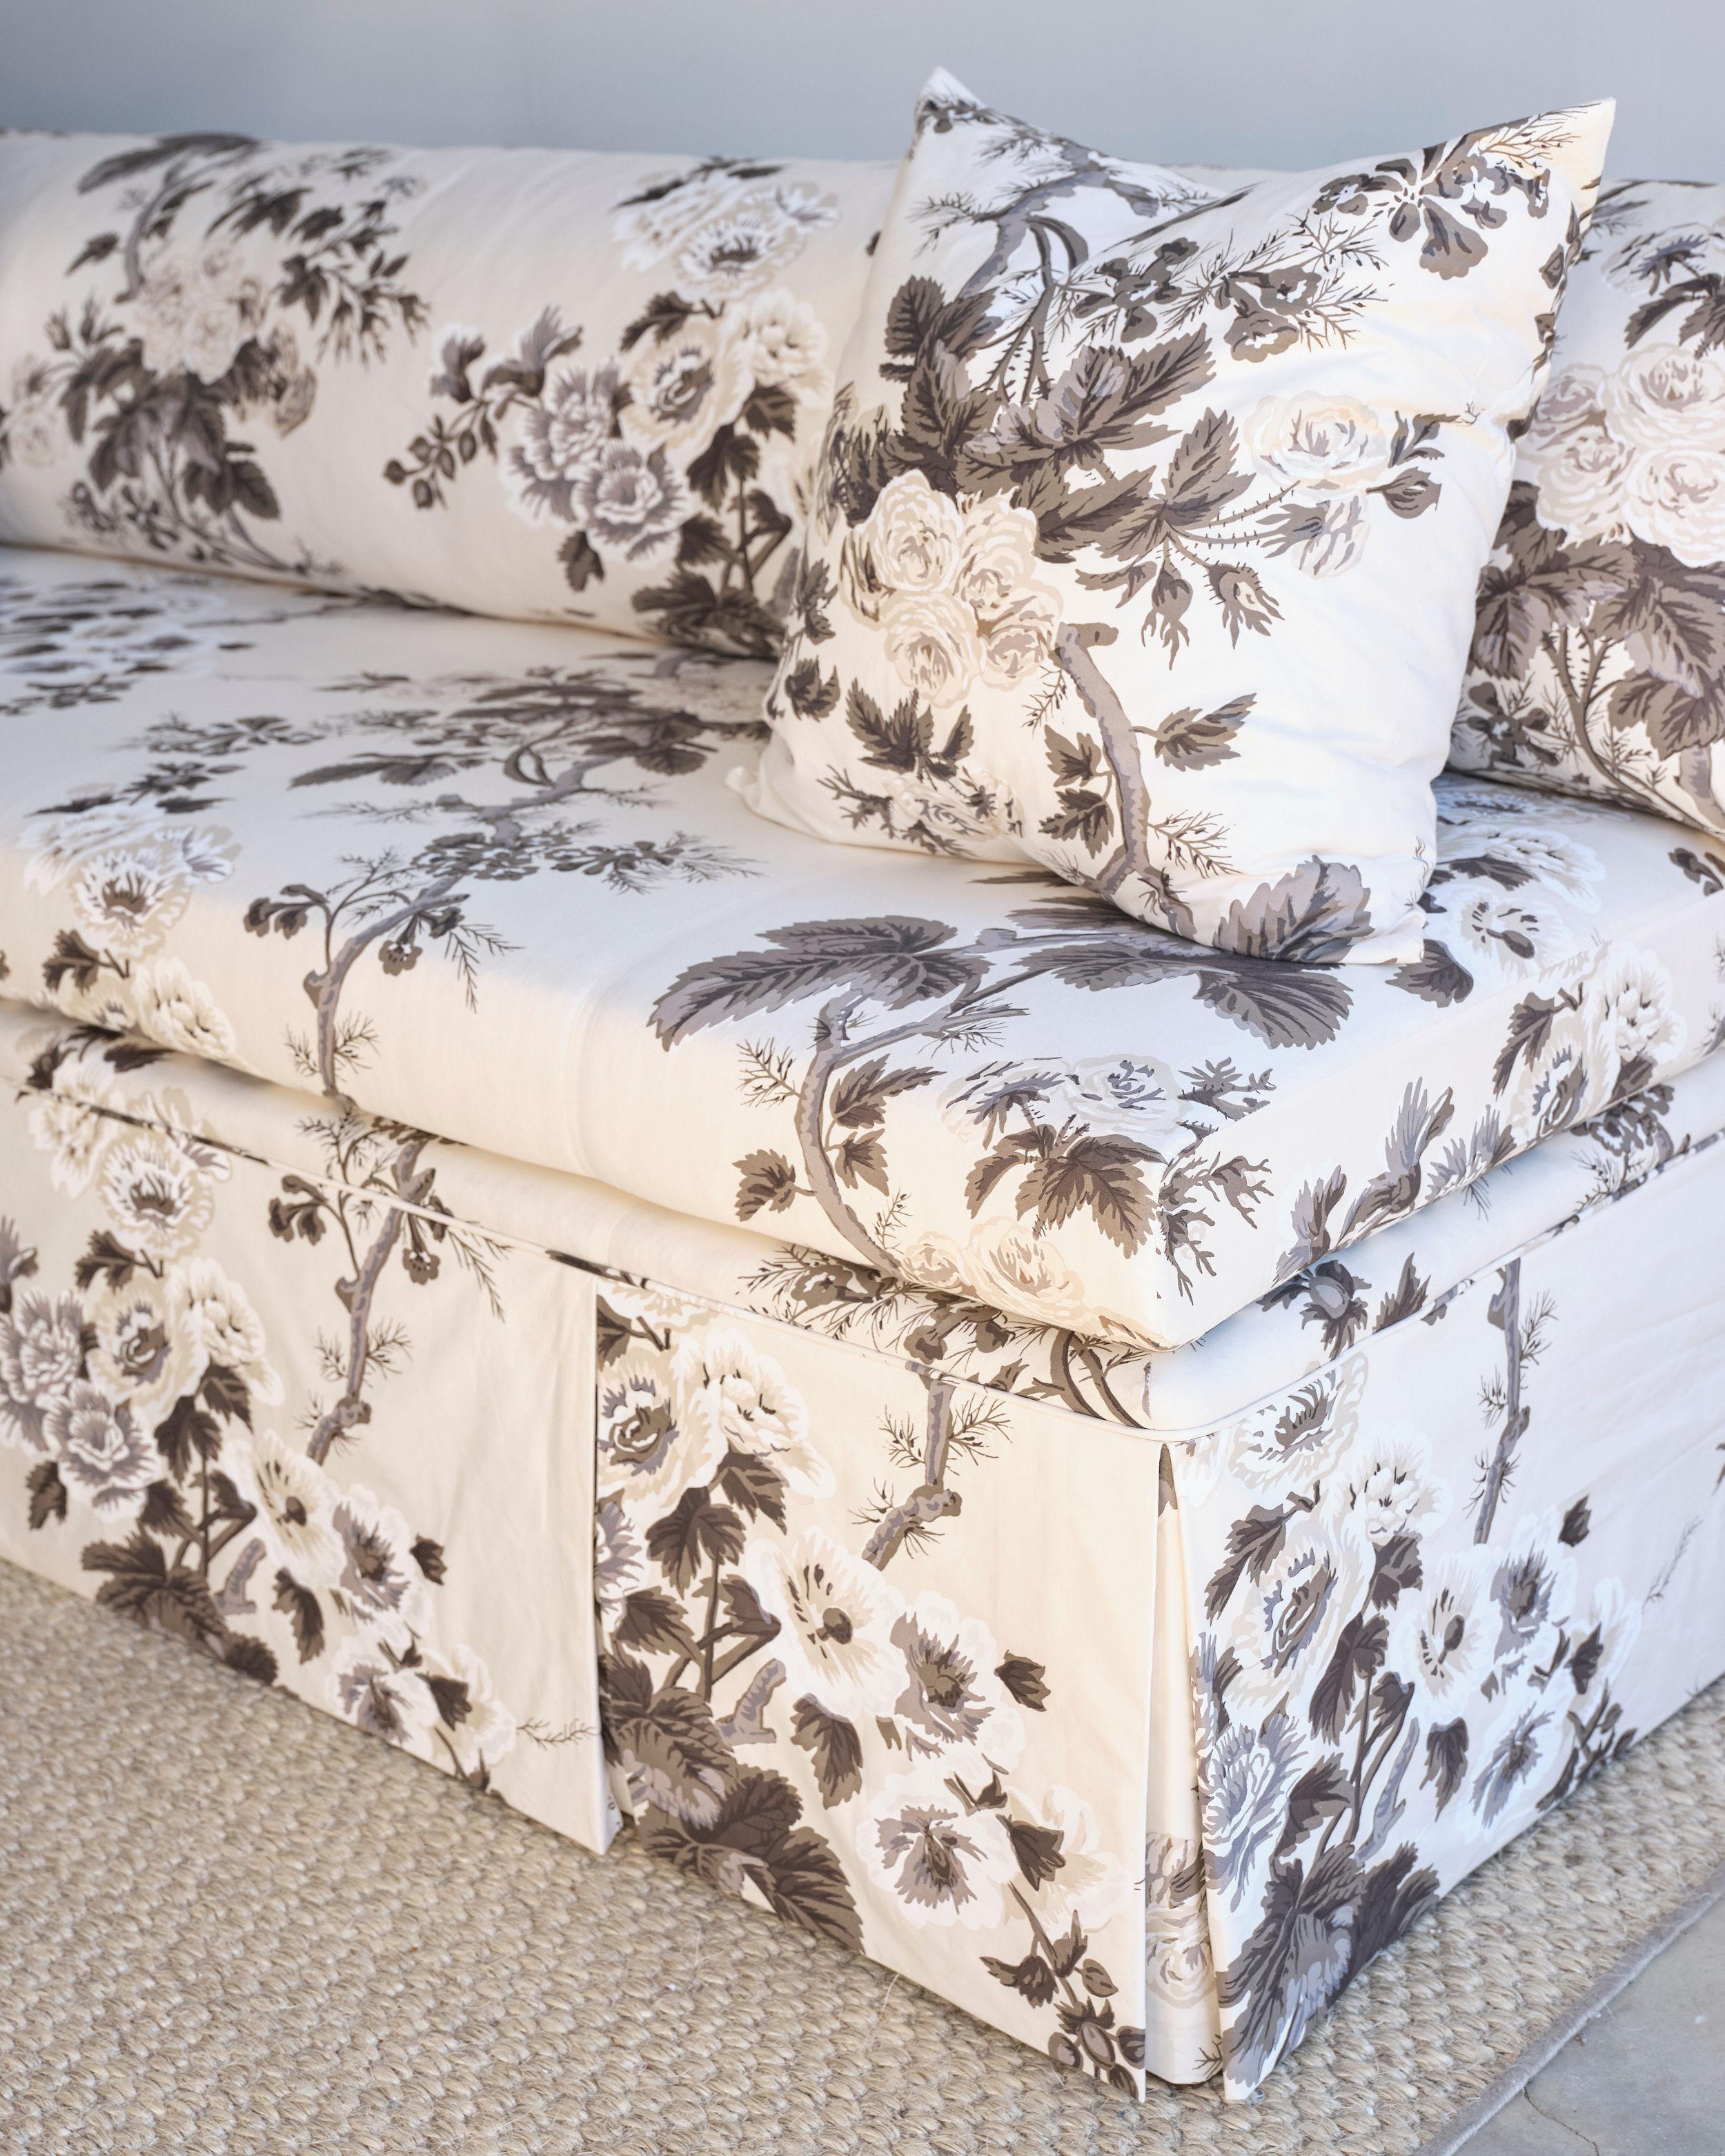 This beautiful custom armless sofa was built by a local Jackson, Mississippi upholsterer about a year ago. It is new and has never been used. It is covered in Schumacher Fabric: Pynne Hollyhock/ Charcoal that has been sprayed with Fibregaurd. It has